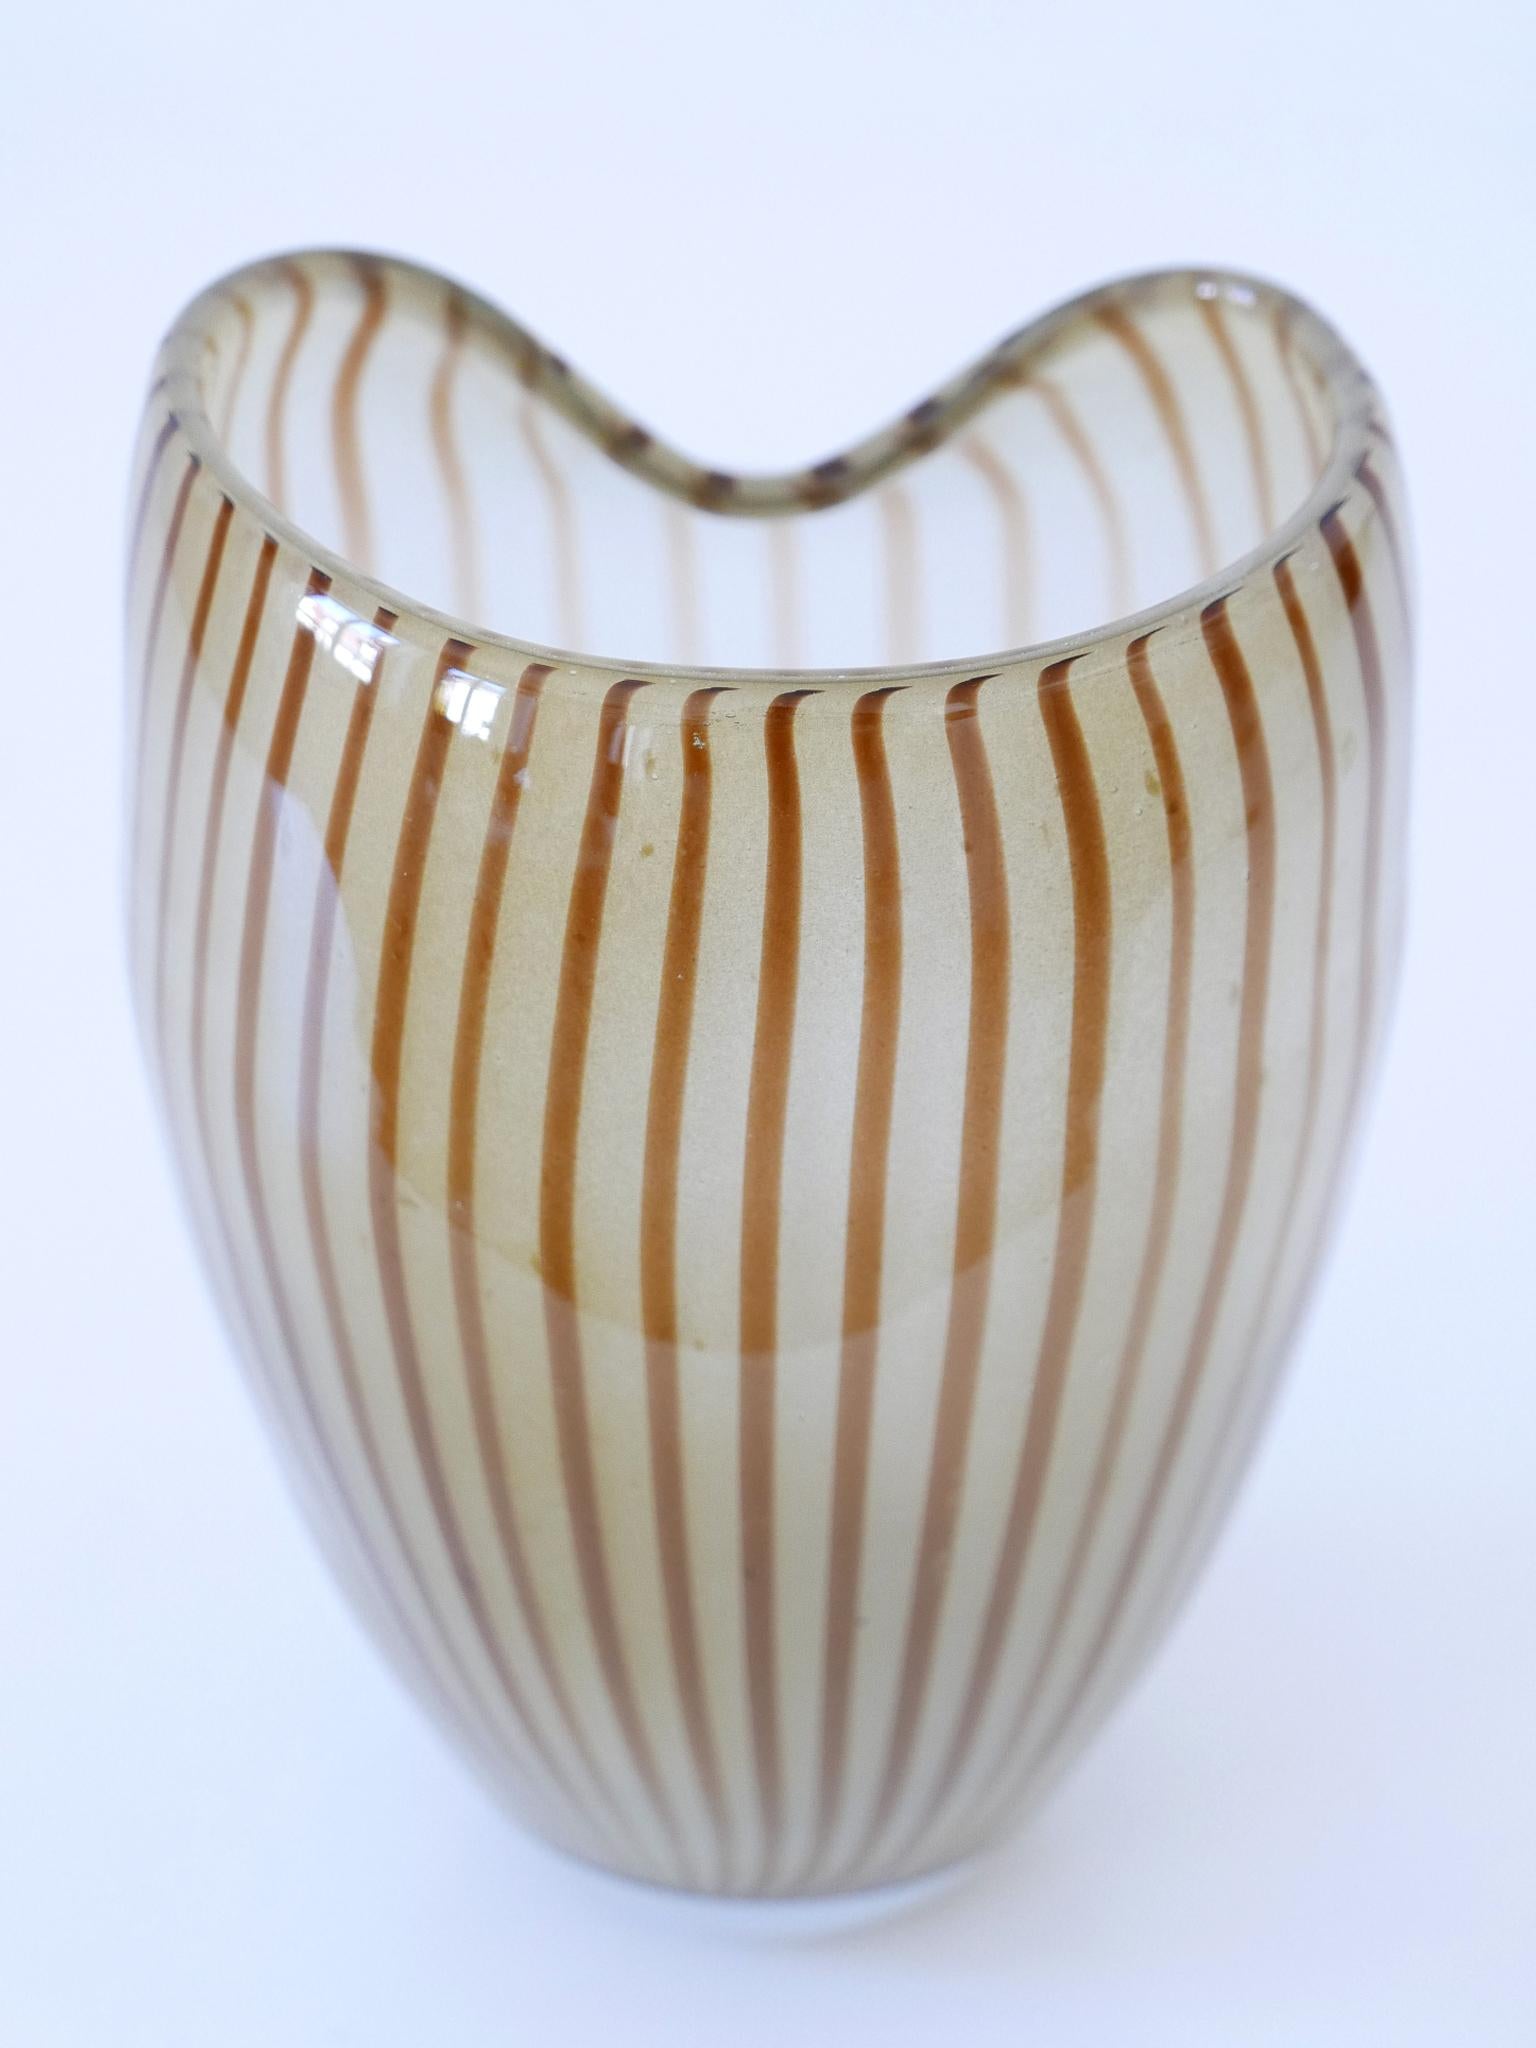 Decorative Mid Century Modern Murano Glass Vase Italy 1960s  For Sale 9